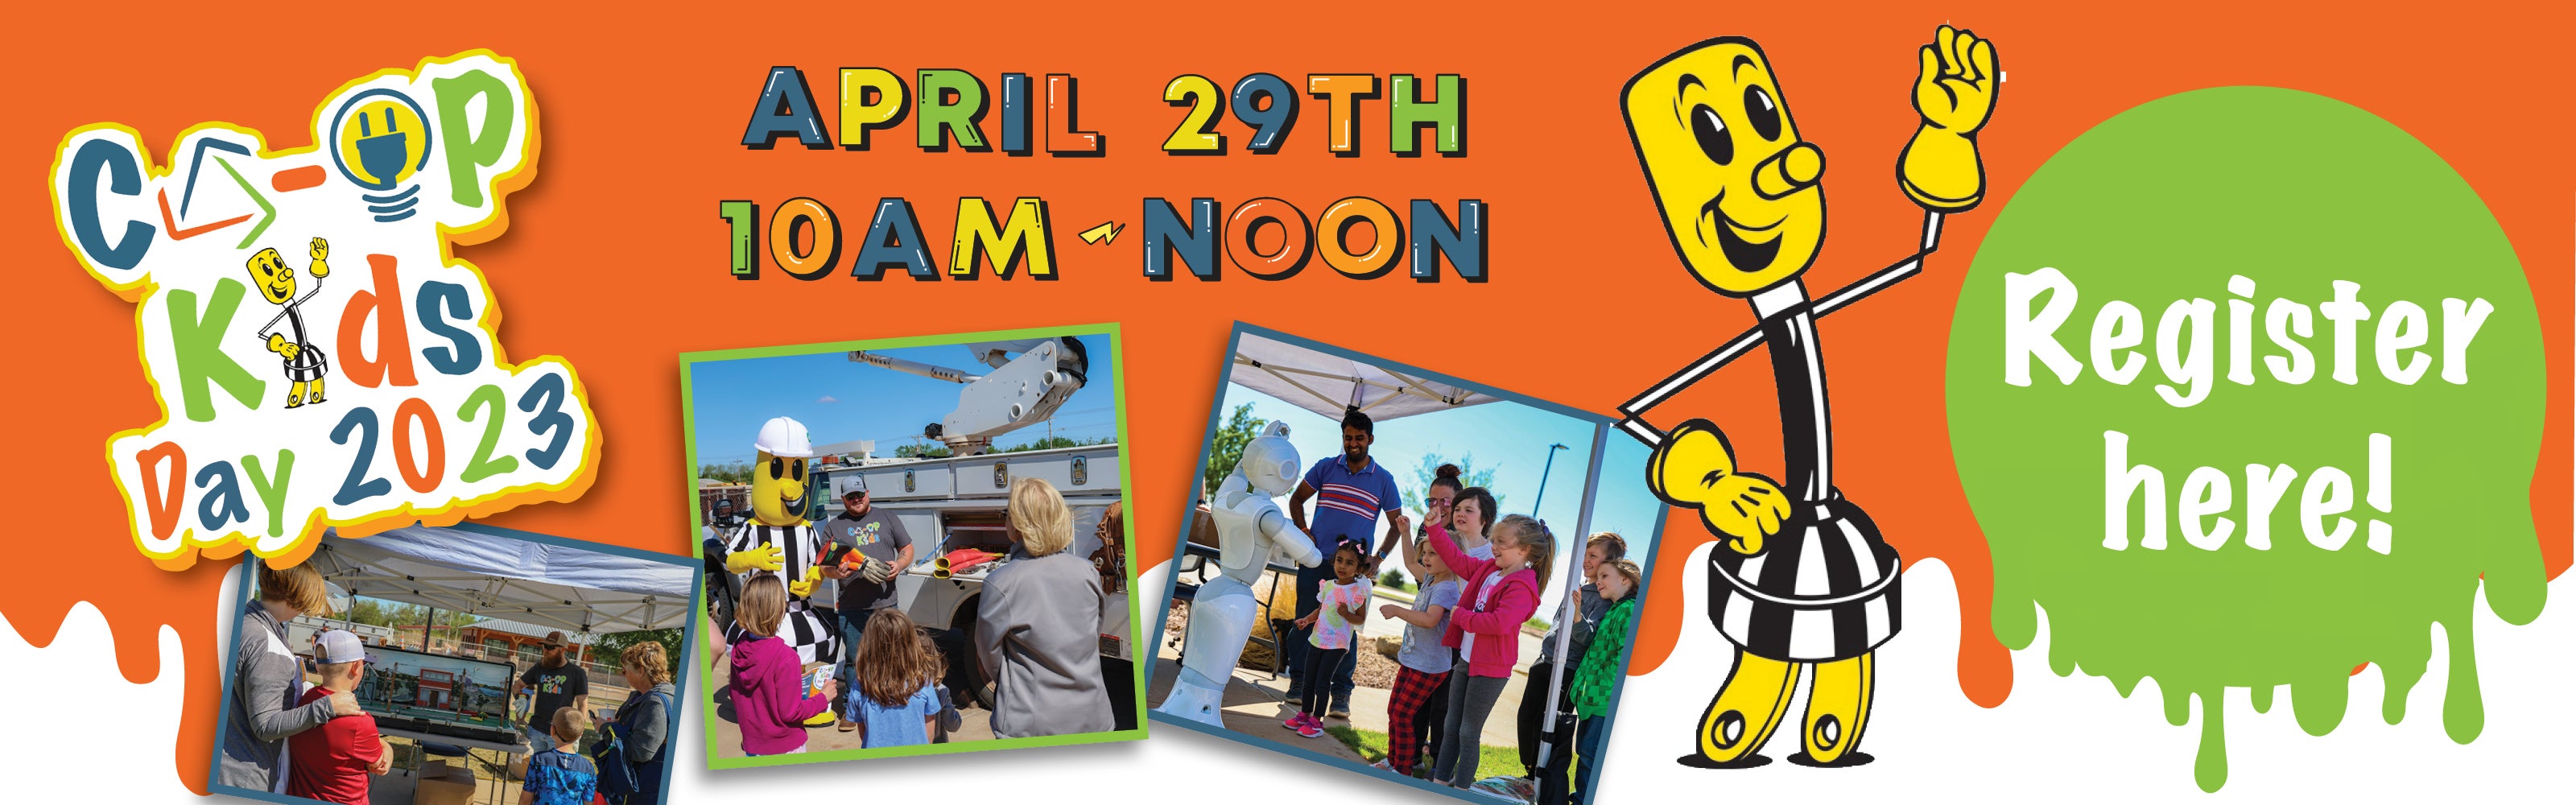 Co-op Kids Day 2023. April 29th 10 a.m. to noon. Register here!